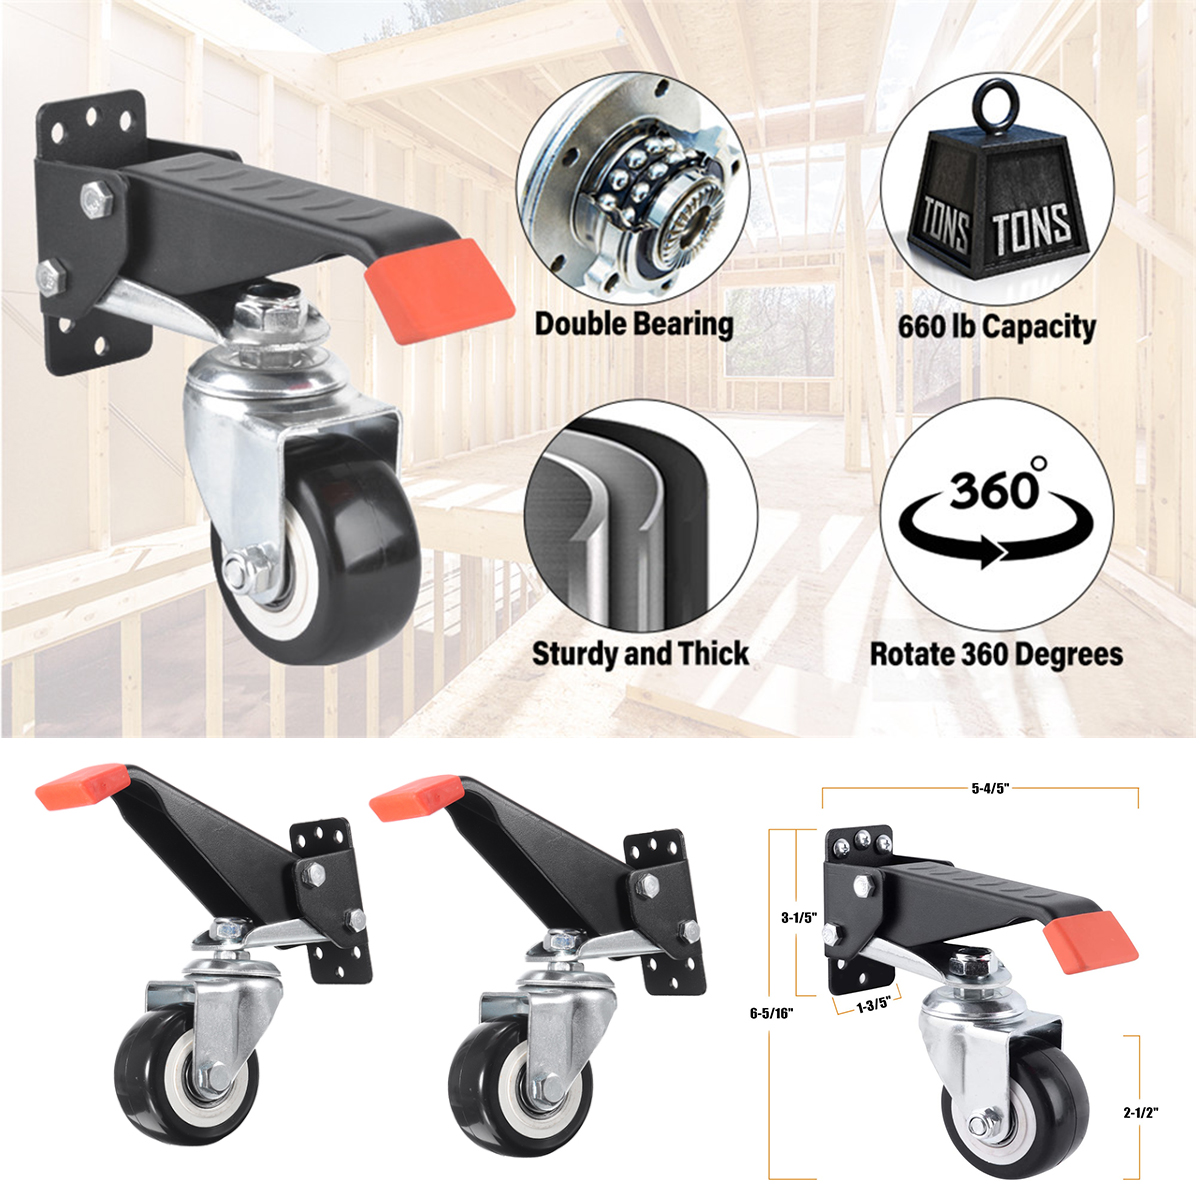 660-LBS-Heavy-Duty-Workbench-Casters-Kit-Retractable-Caster-Wheels-for-Workbenches-Machinery-and-Tab-1808770-6